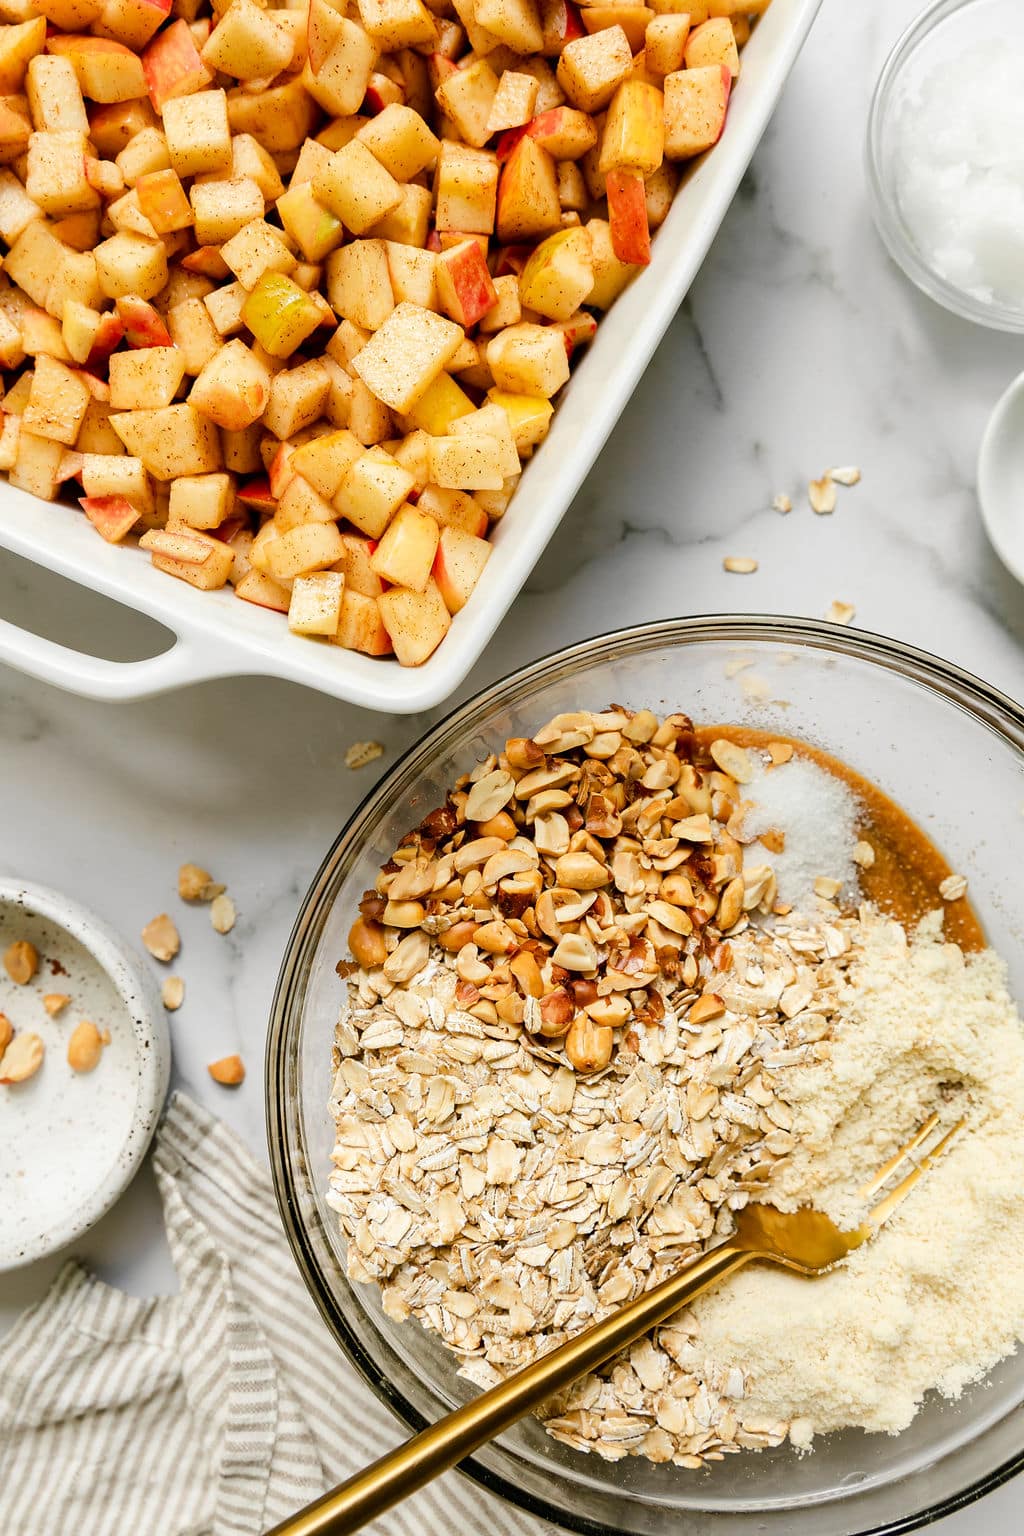 Diced apples with cinnamon in a white baking dish, a mixing bowl filled with ingredients for peanut butter and oat topping.